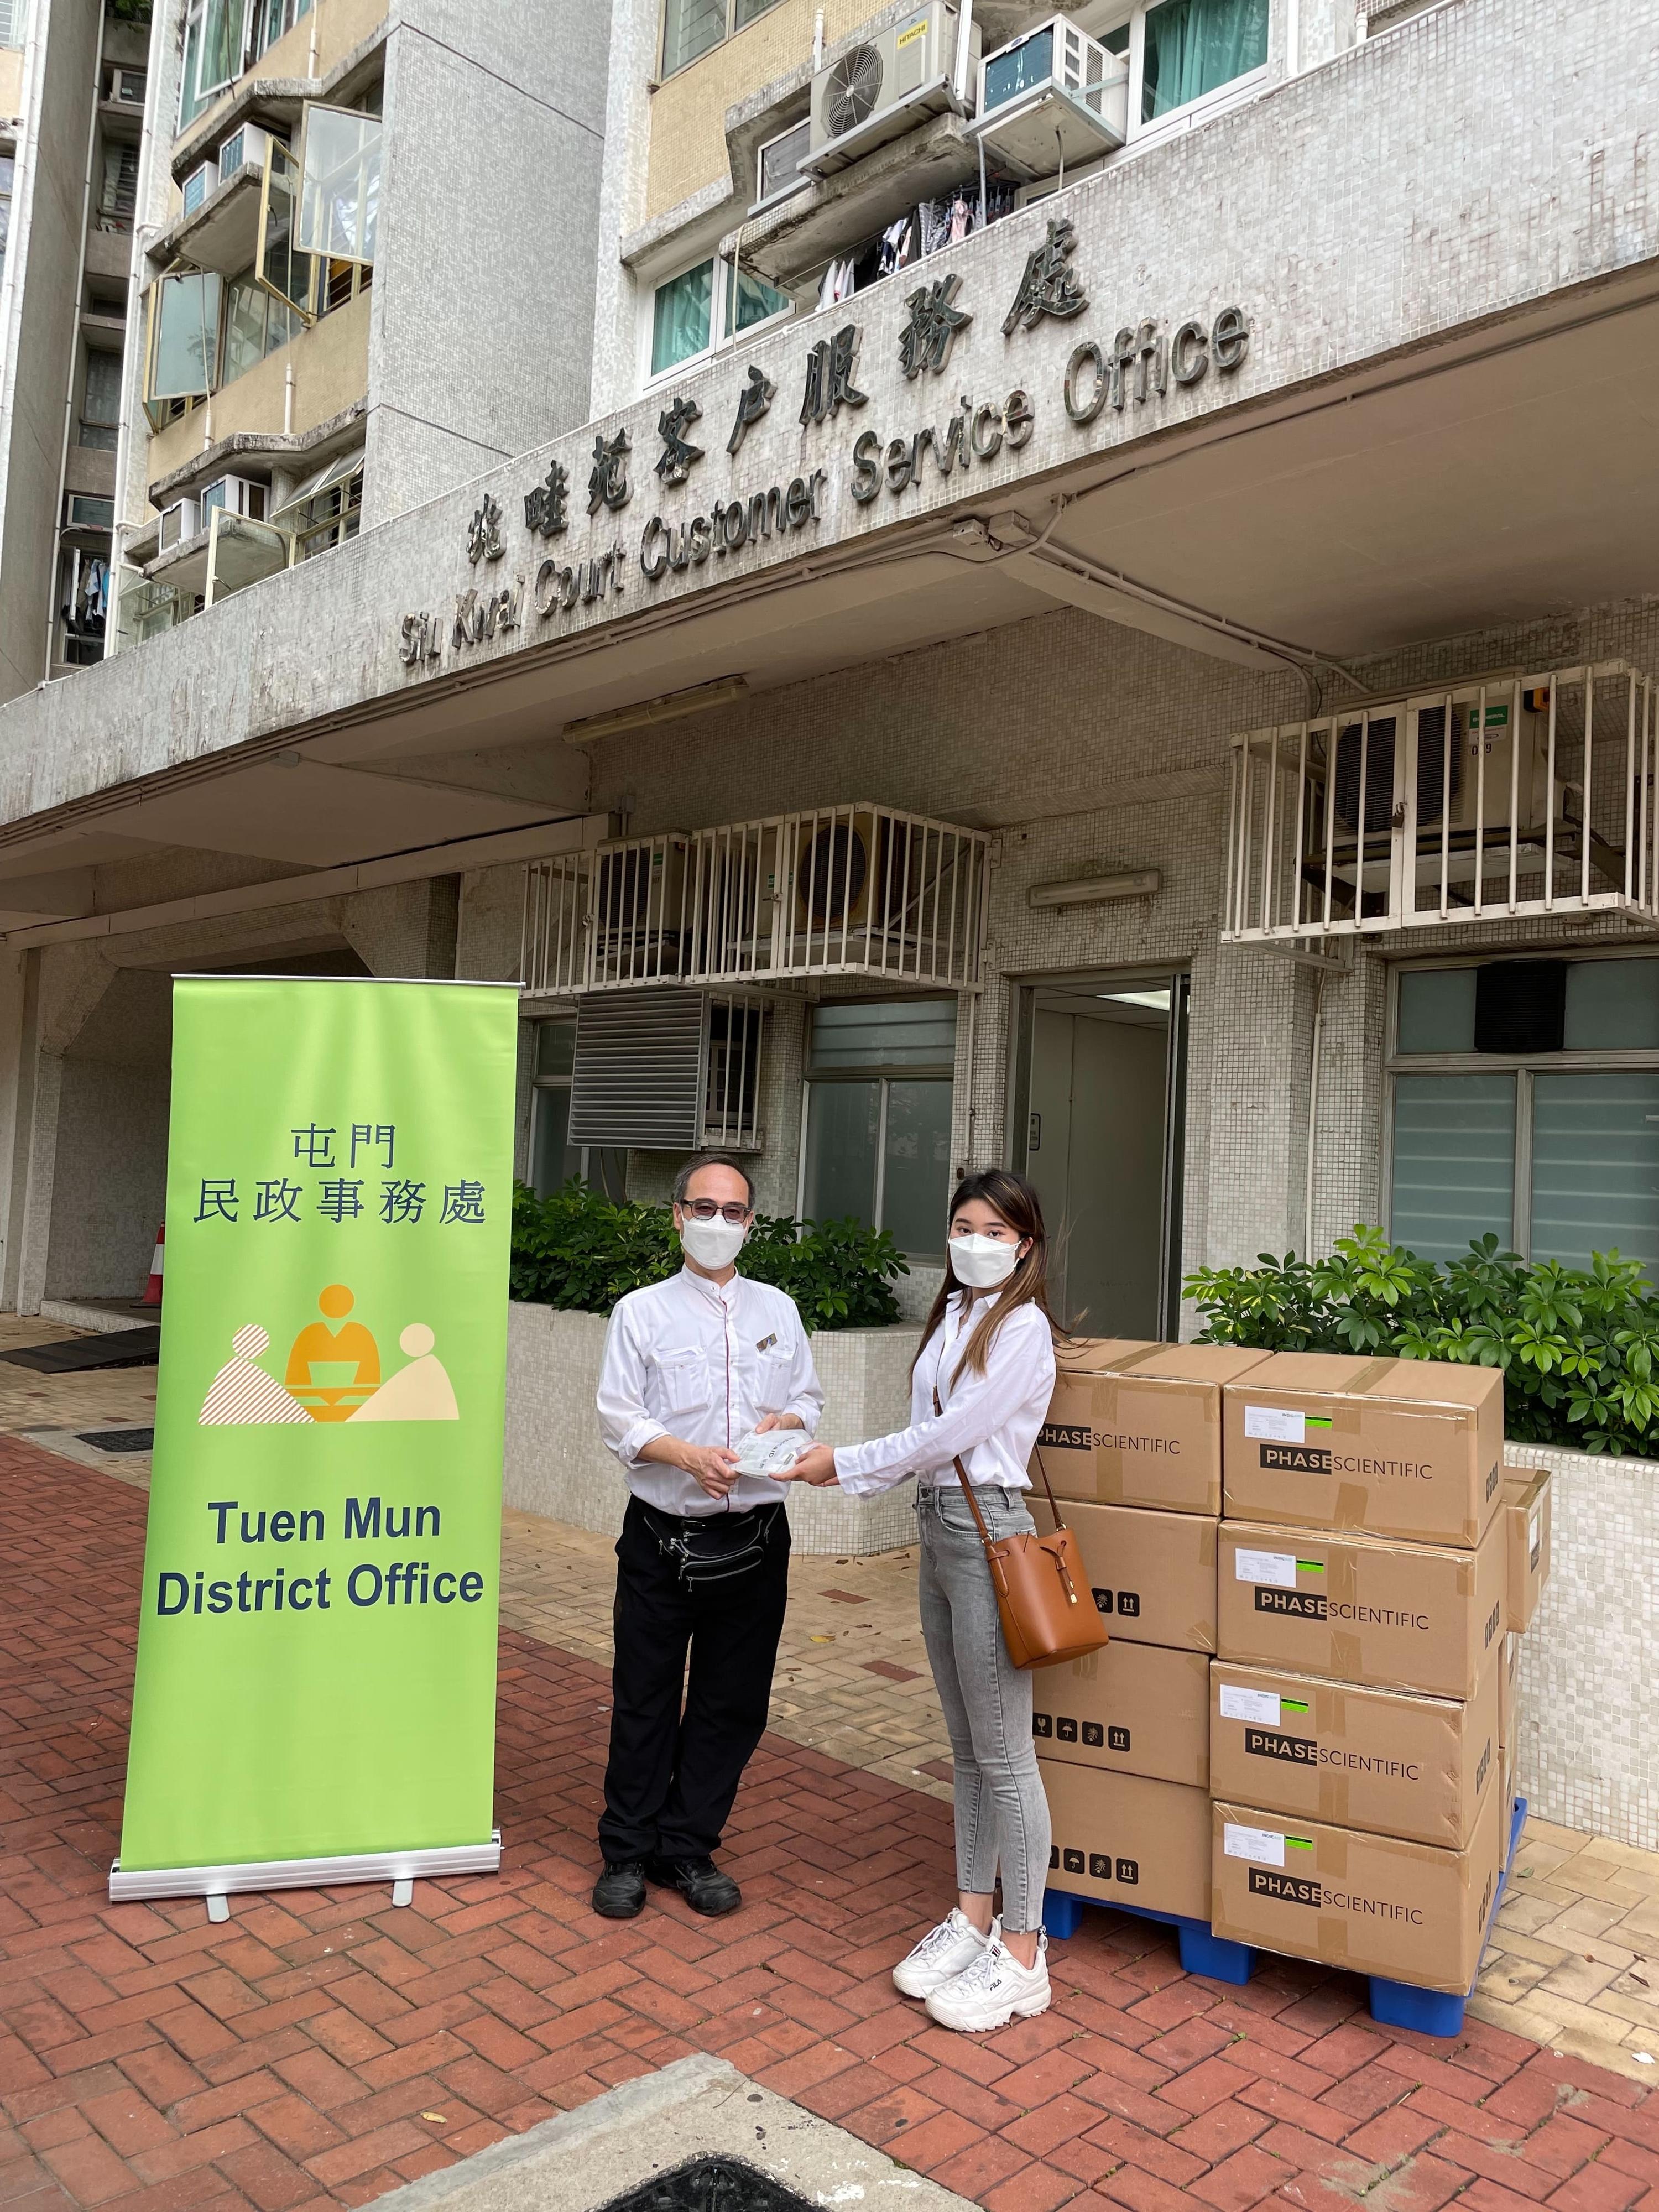 The Tuen Mun District Office today (March 18) distributed COVID-19 rapid test kits to households, cleansing workers and property management staff living and working in Siu Kwai Court for voluntary testing through the property management company.